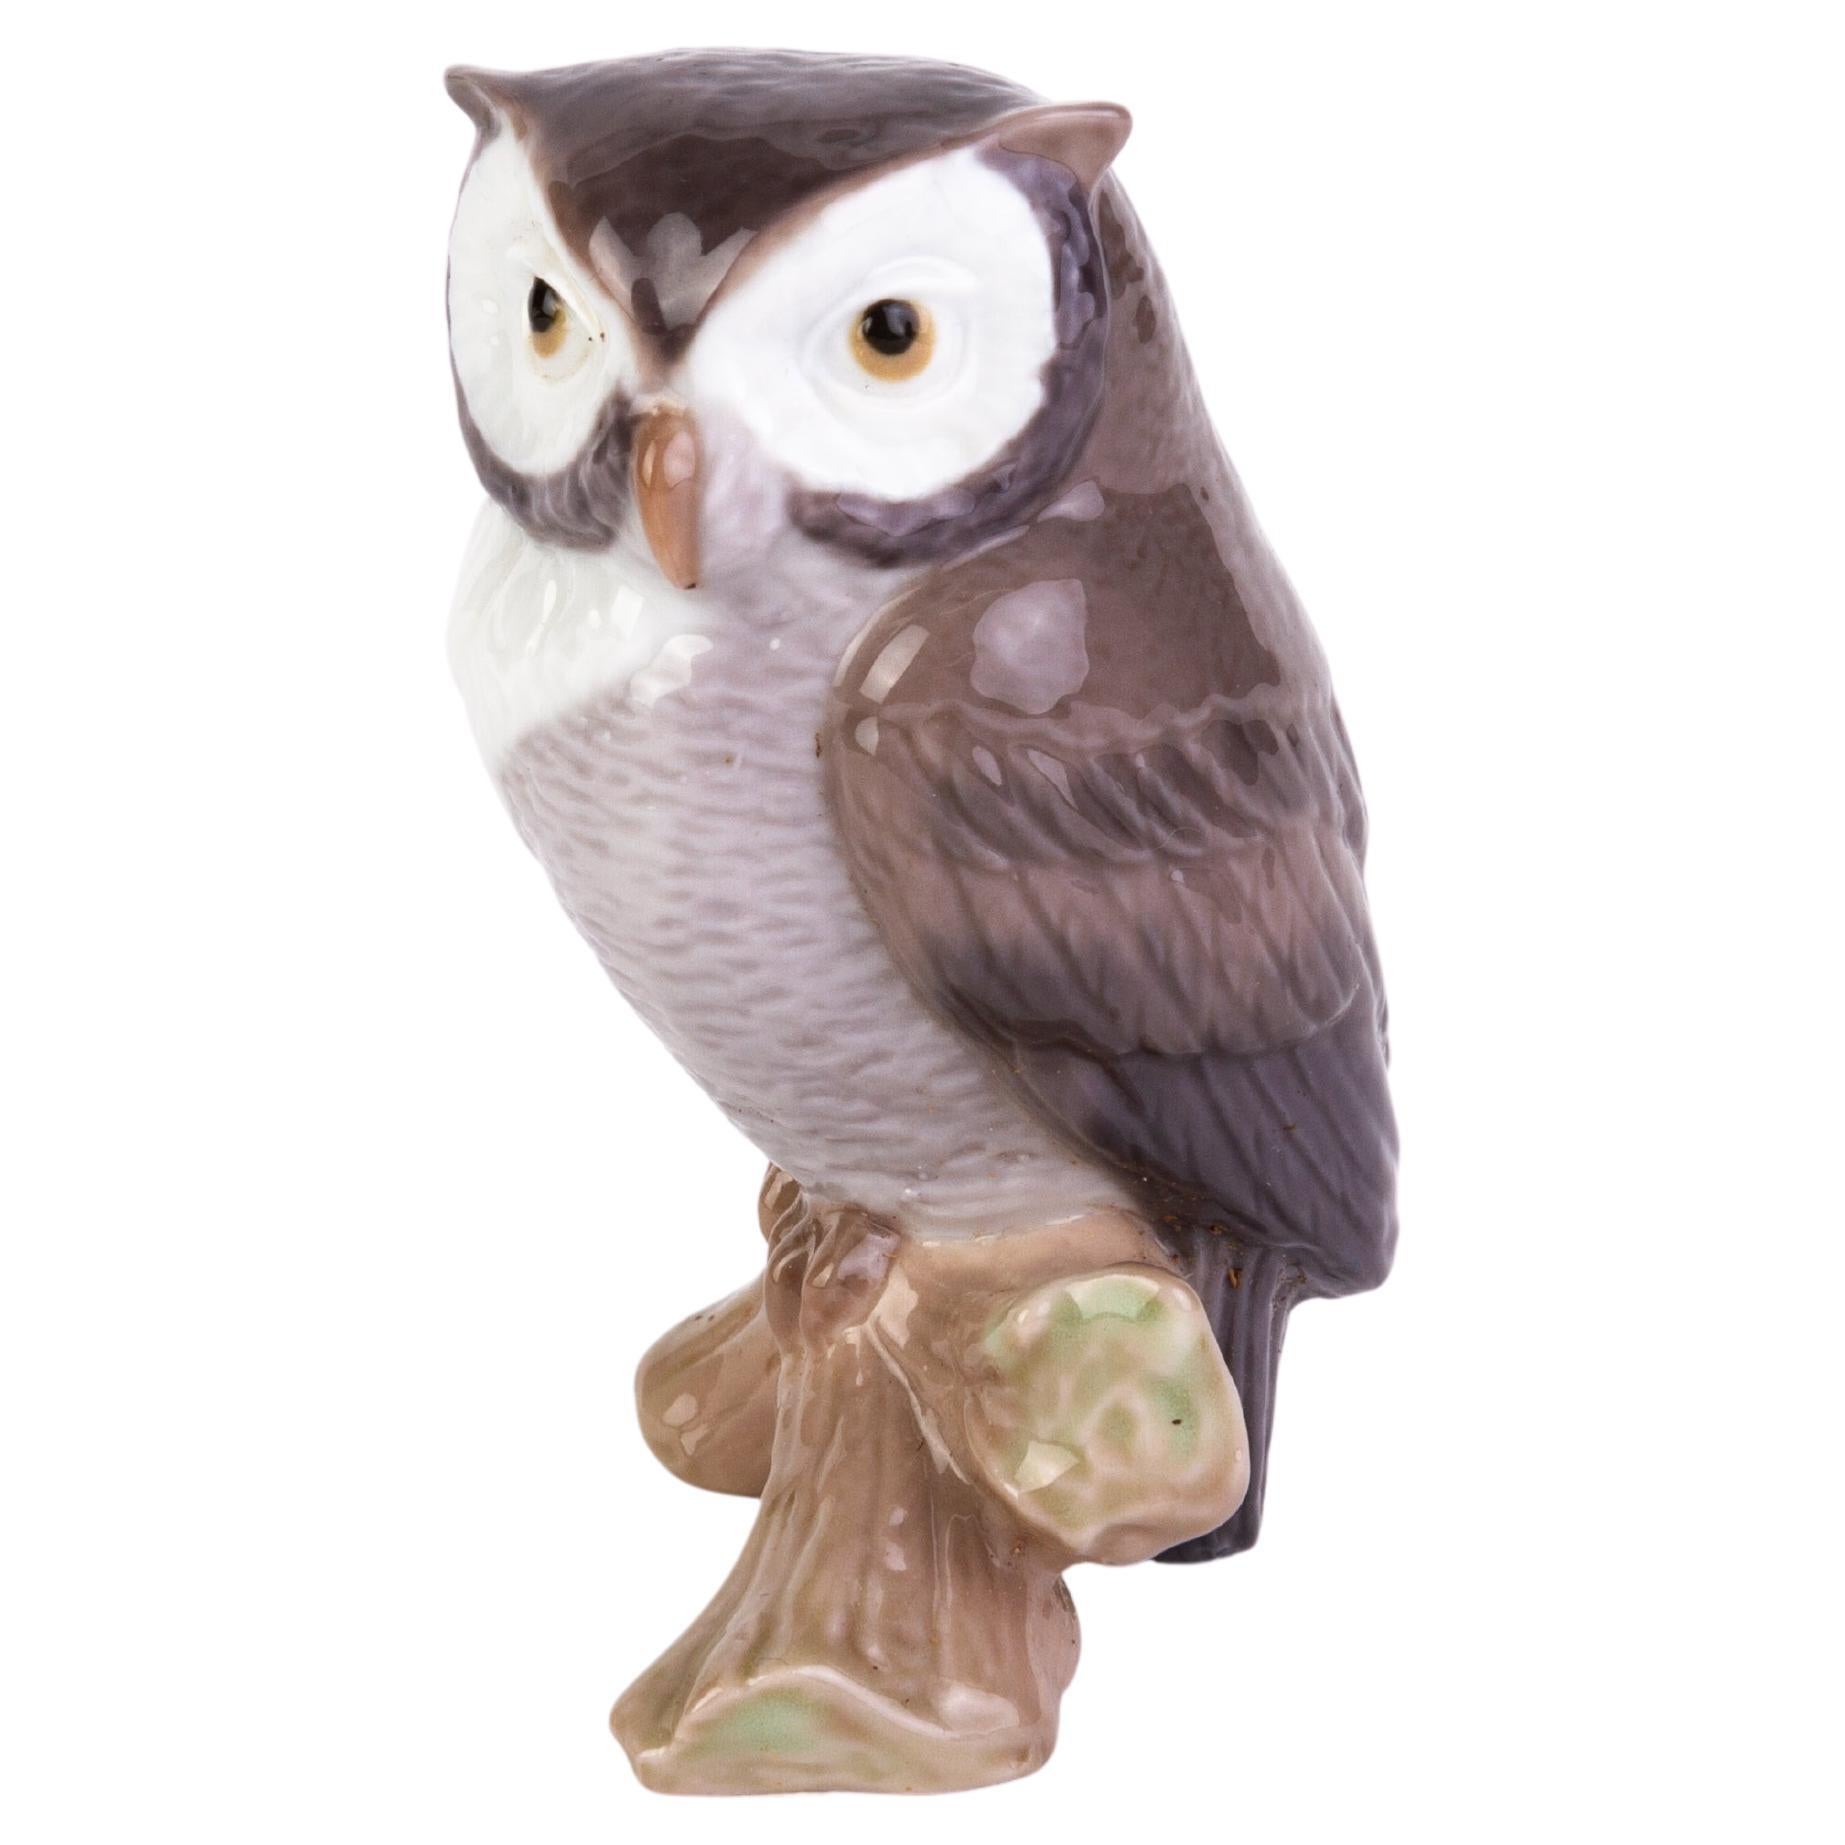 Retired Lladro Fine Porcelain Sculpture Figure Group "Lucky Owl" 8035 For Sale